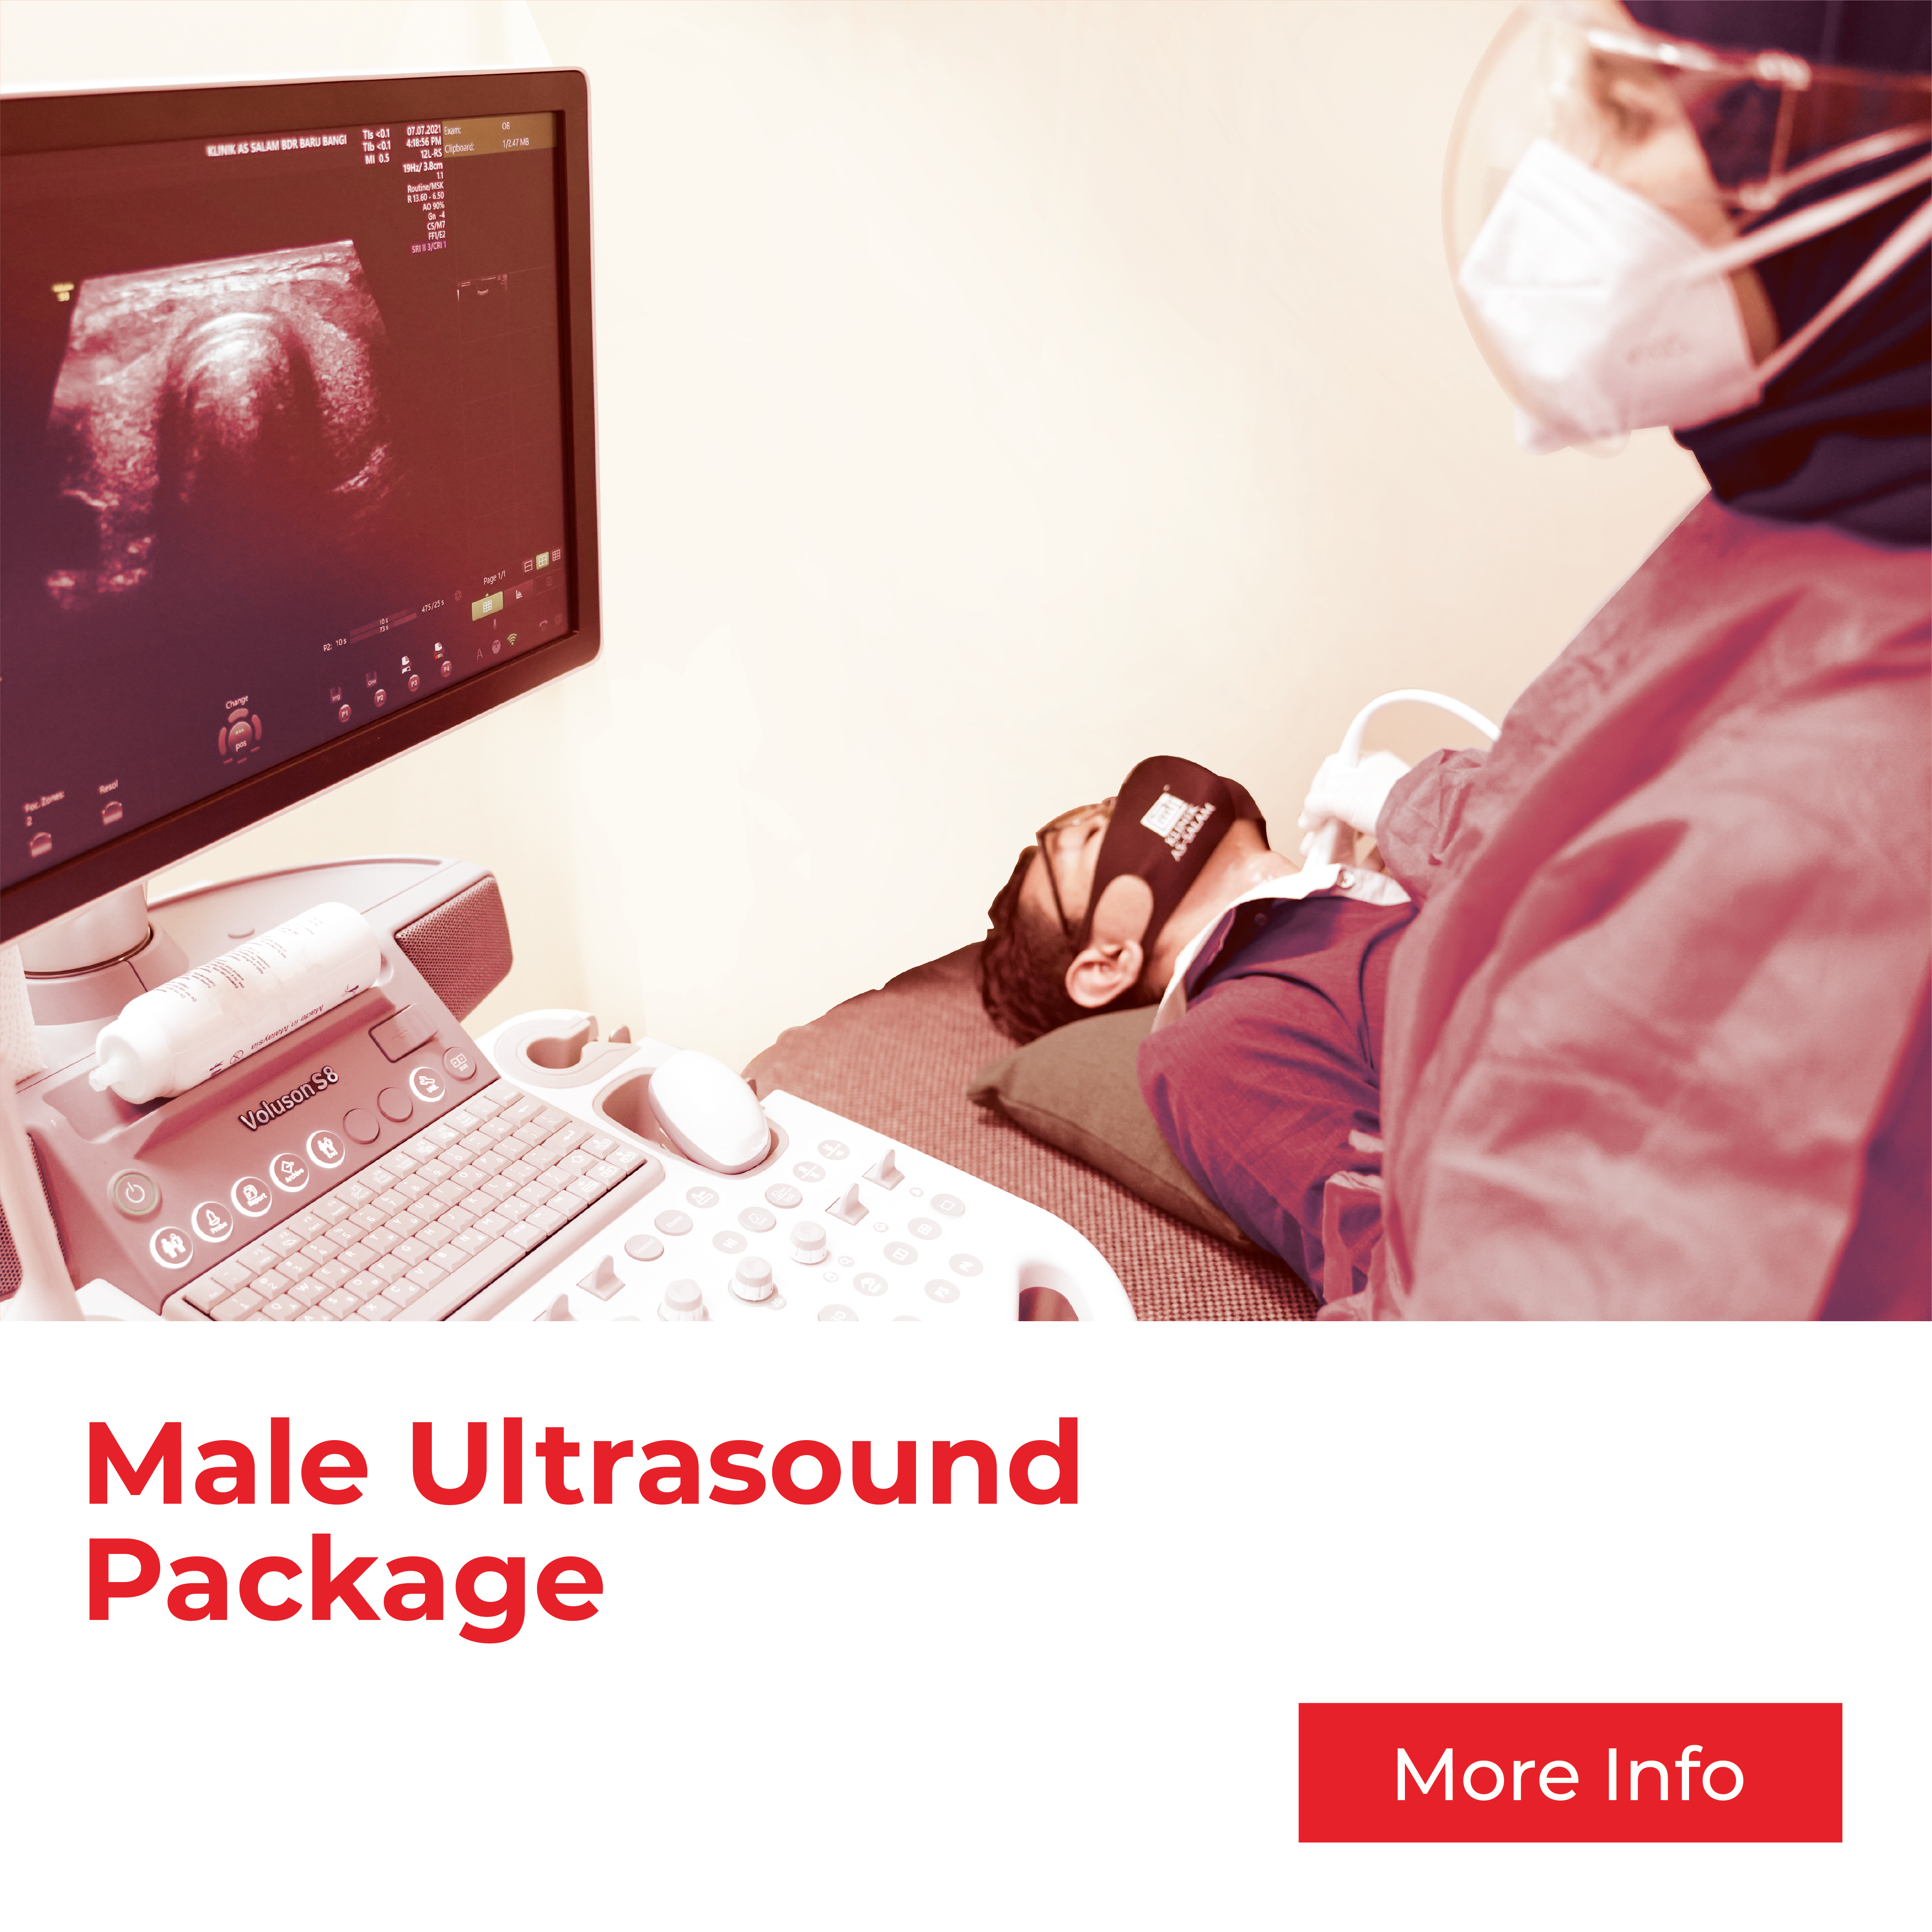 Male Ultrasound Package from Klinik As Salam to check the male reproductive system & take care of health